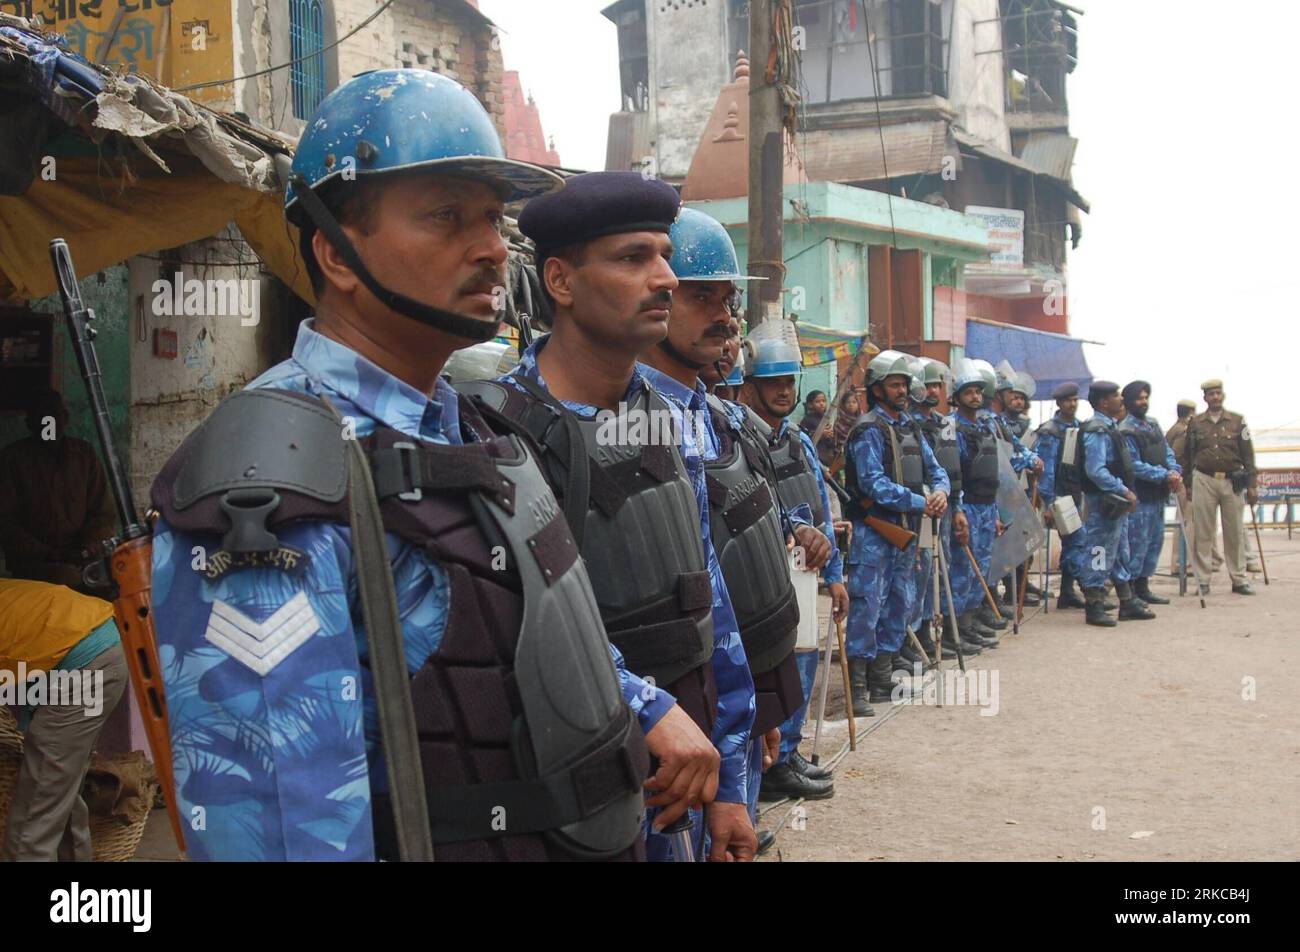 Bildnummer: 54721439  Datum: 08.12.2010  Copyright: imago/Xinhua (101208) -- VARANASI, Dec. 08, 2010 (Xinhua) -- Indian police stand guard near the site of Tuesday s blast in Varanasi, India, Dec. 8, 2010. India s Uttar Pradesh Chief Minister Mayawati said Wednesday that the northern state wanted the Congress party-led central government to deploy an anti- terrorism force in Varanasi, after the Hindu holy city was hit by a bomb attack Tuesday. A two-year-old girl was killed and at least 20 people, including some foreigners, were injured in a blast outside a Hindu temple in the holy city of Var Stock Photo